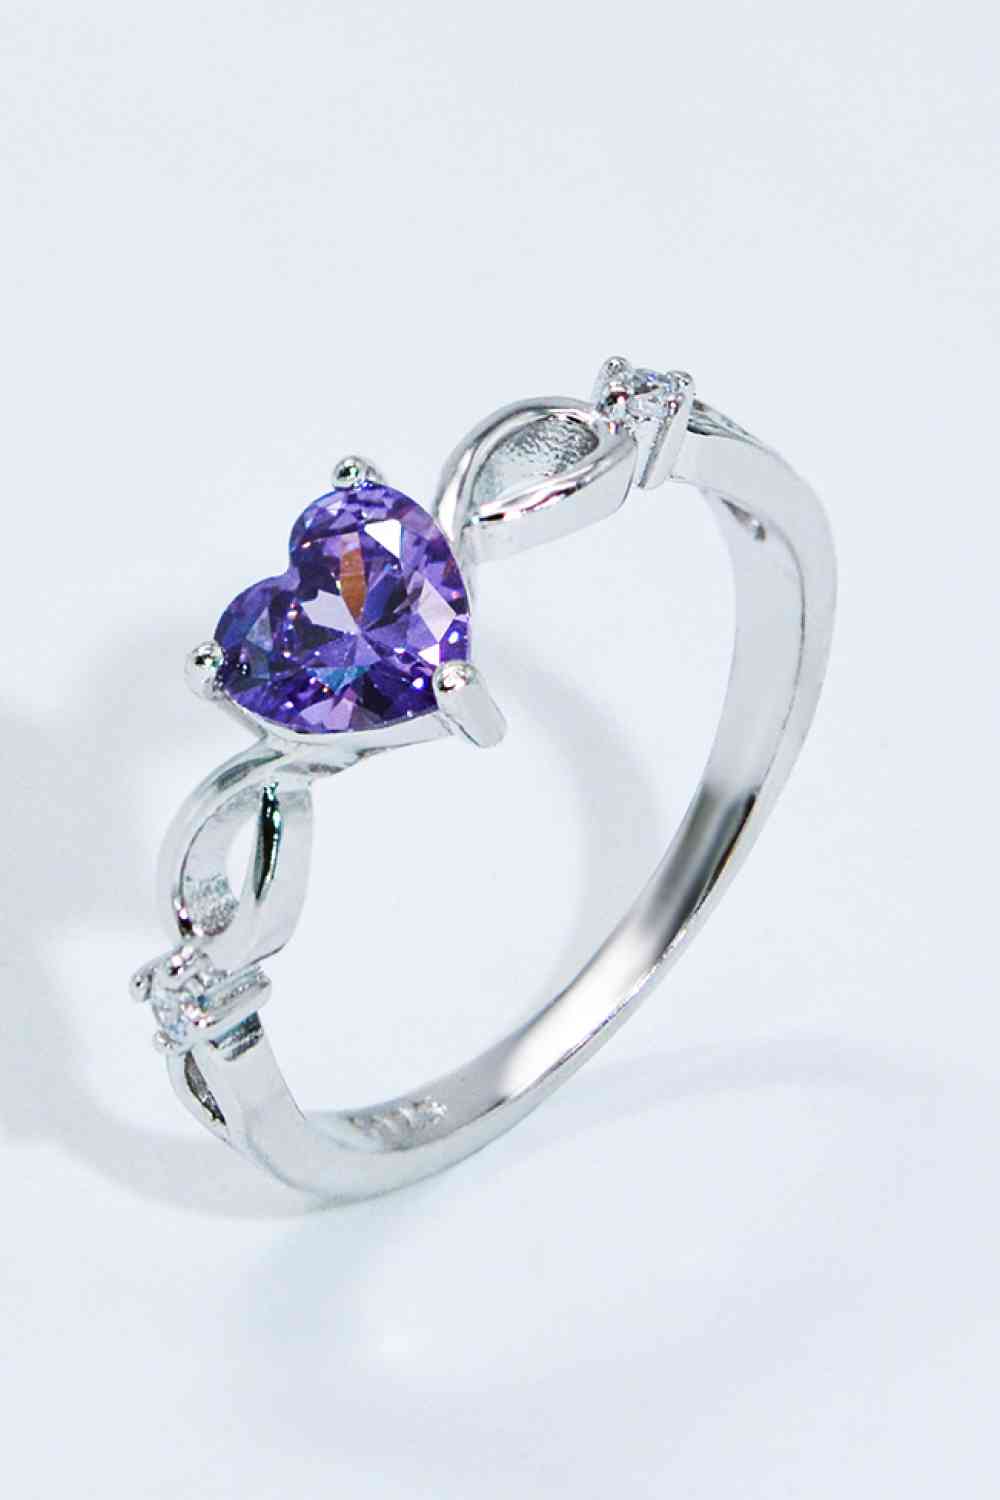 Crystal Heart 925 Sterling Silver Ring Ti Amo I love you